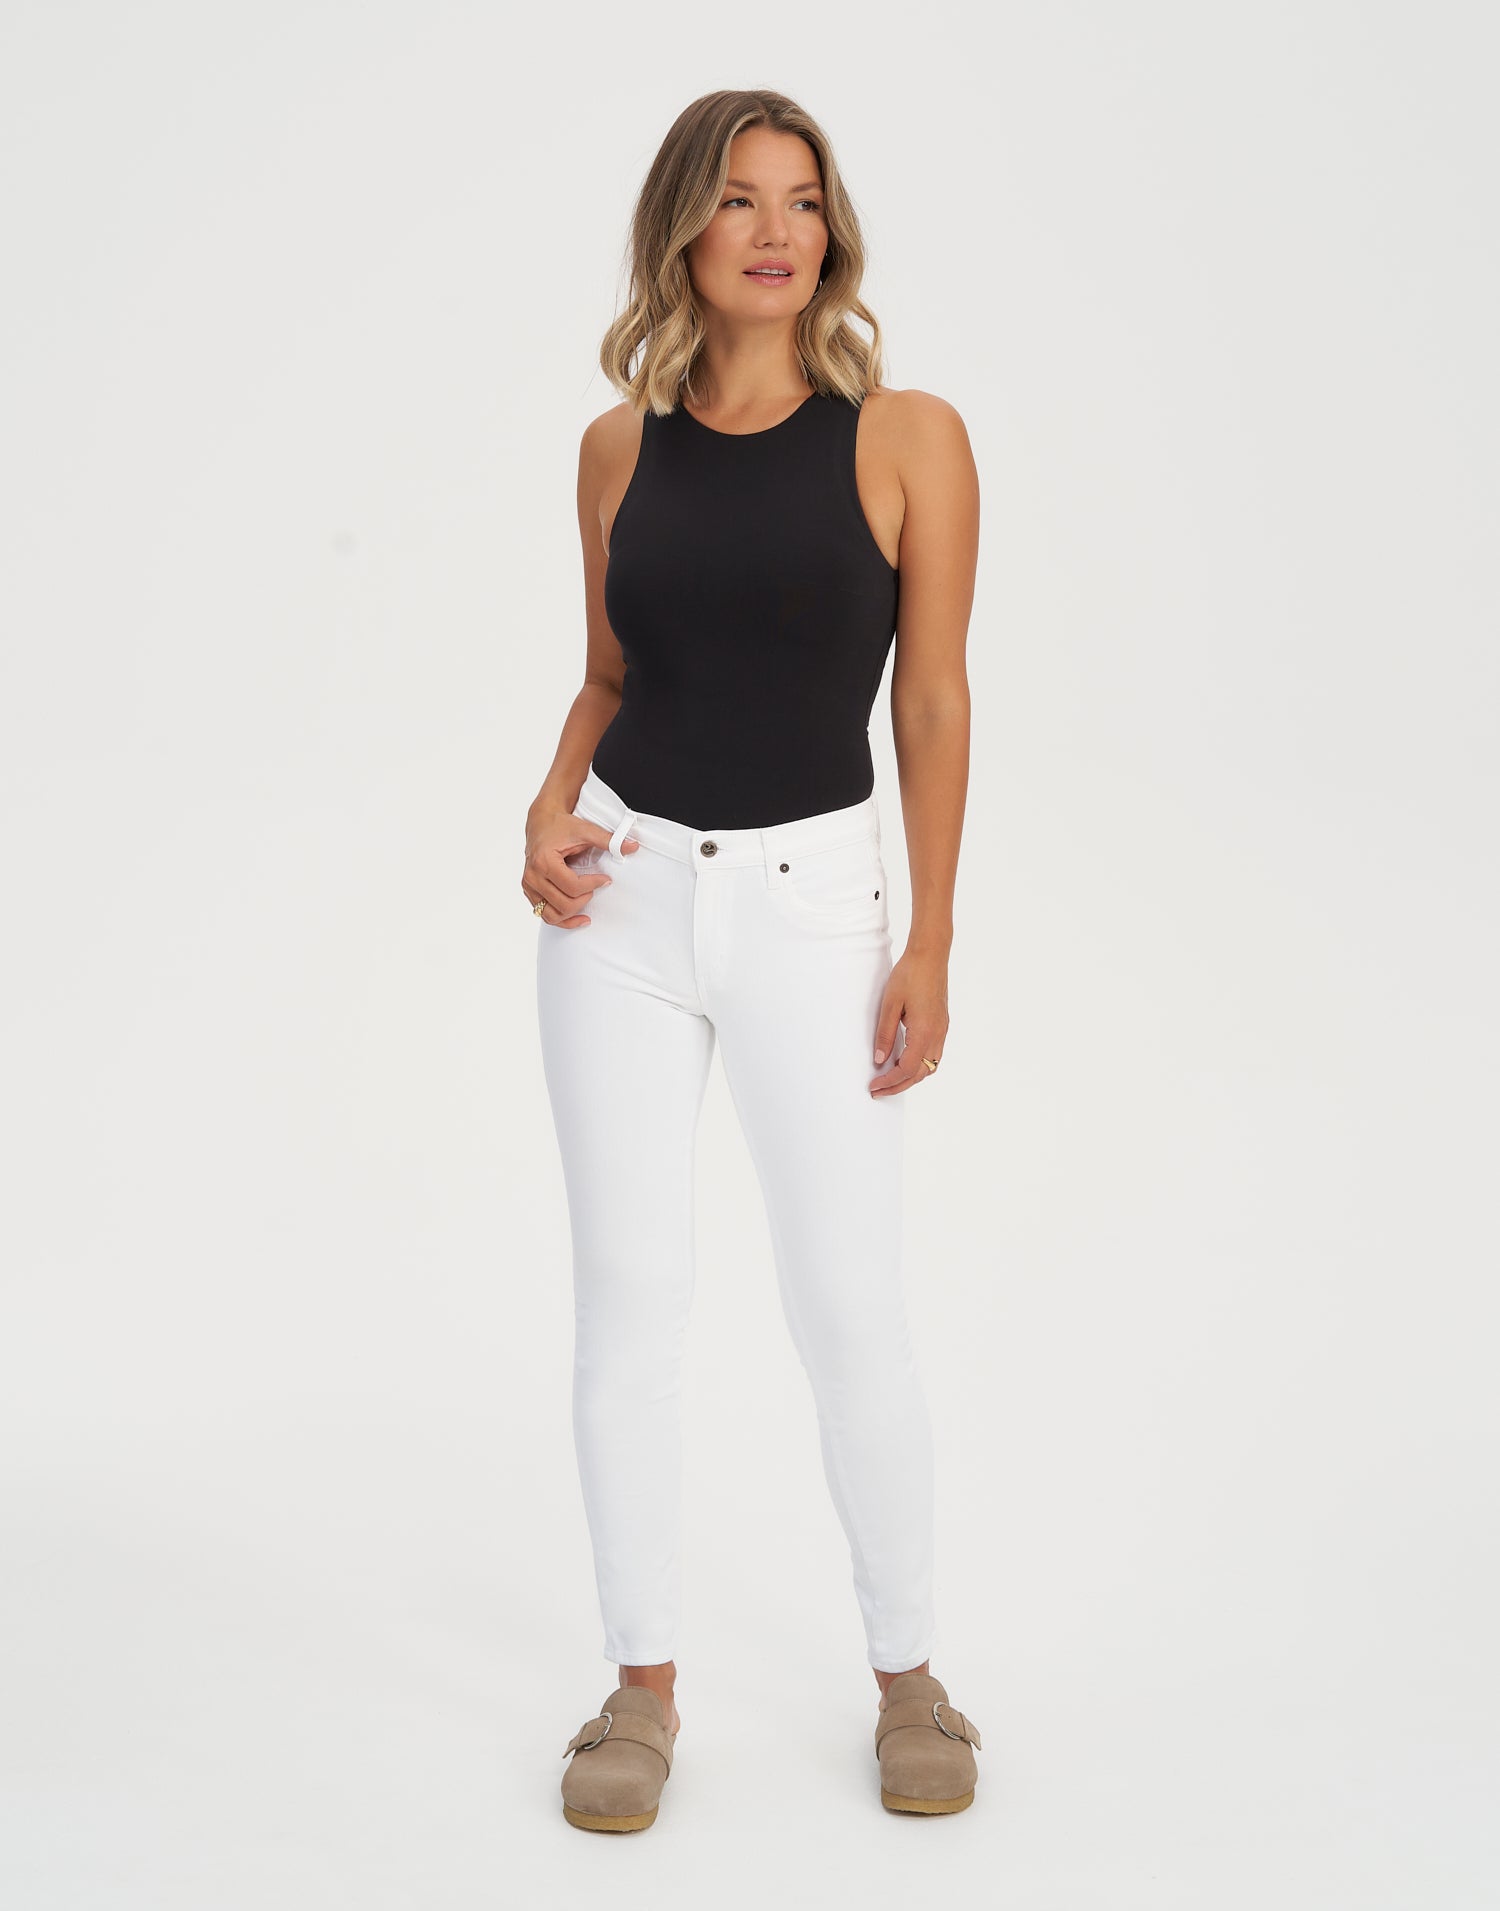 Yoga Jeans Mid-Rise Skinny – Luxquisite Clothing